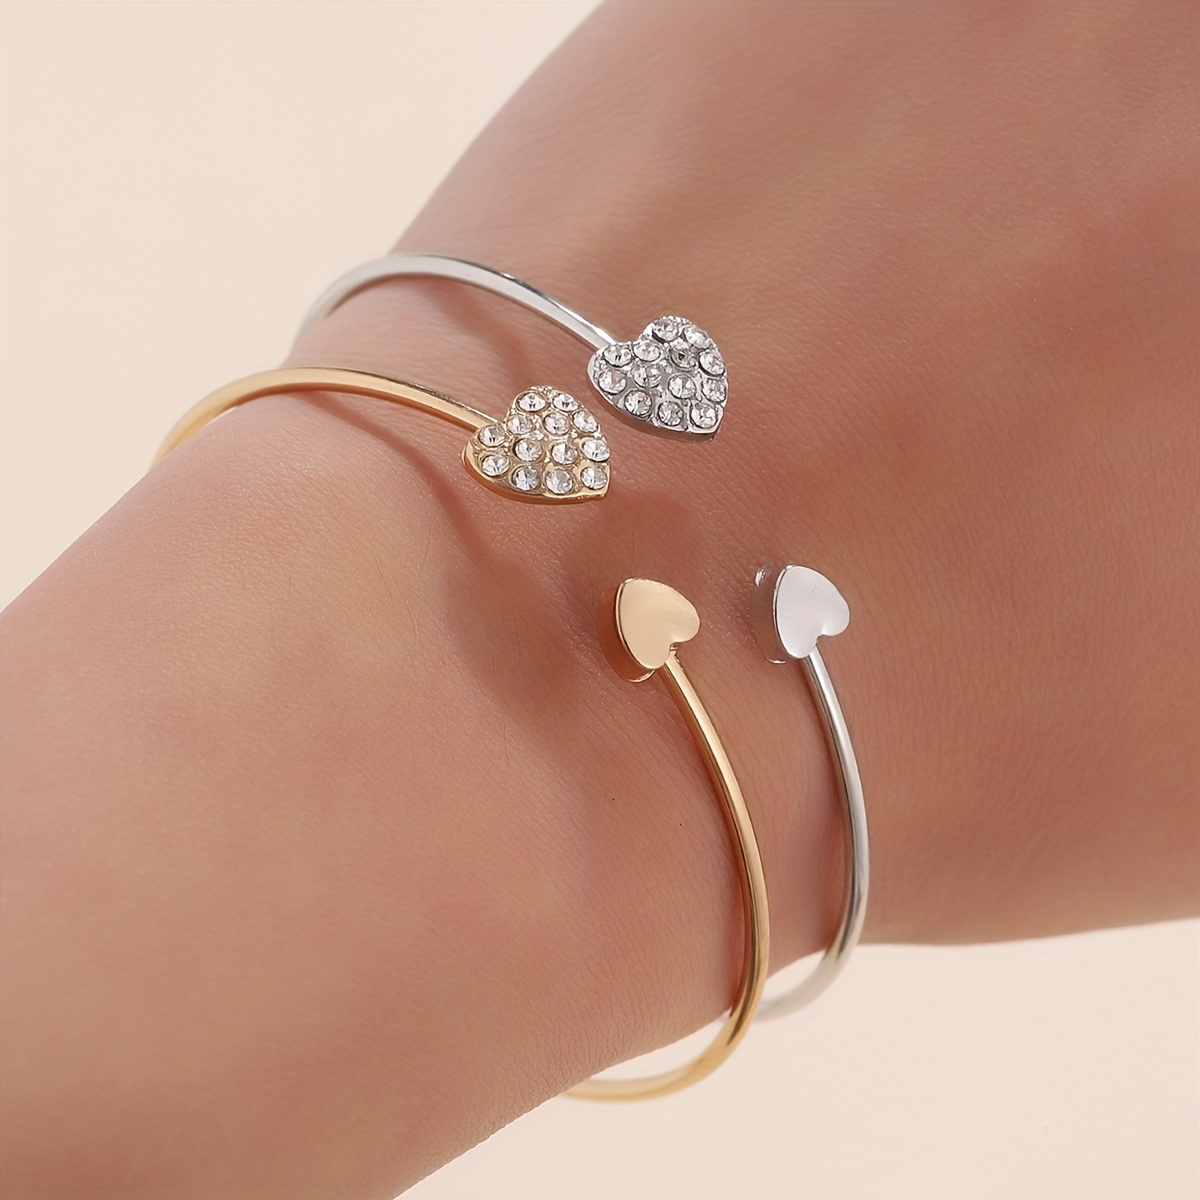 1 PC Exquisite Double Heart Design Cuff Bangle Cuff Bracelet Alloy Jewelry, Jewels Embellished with Tiny Rhinestones Elegant Leisure Style for